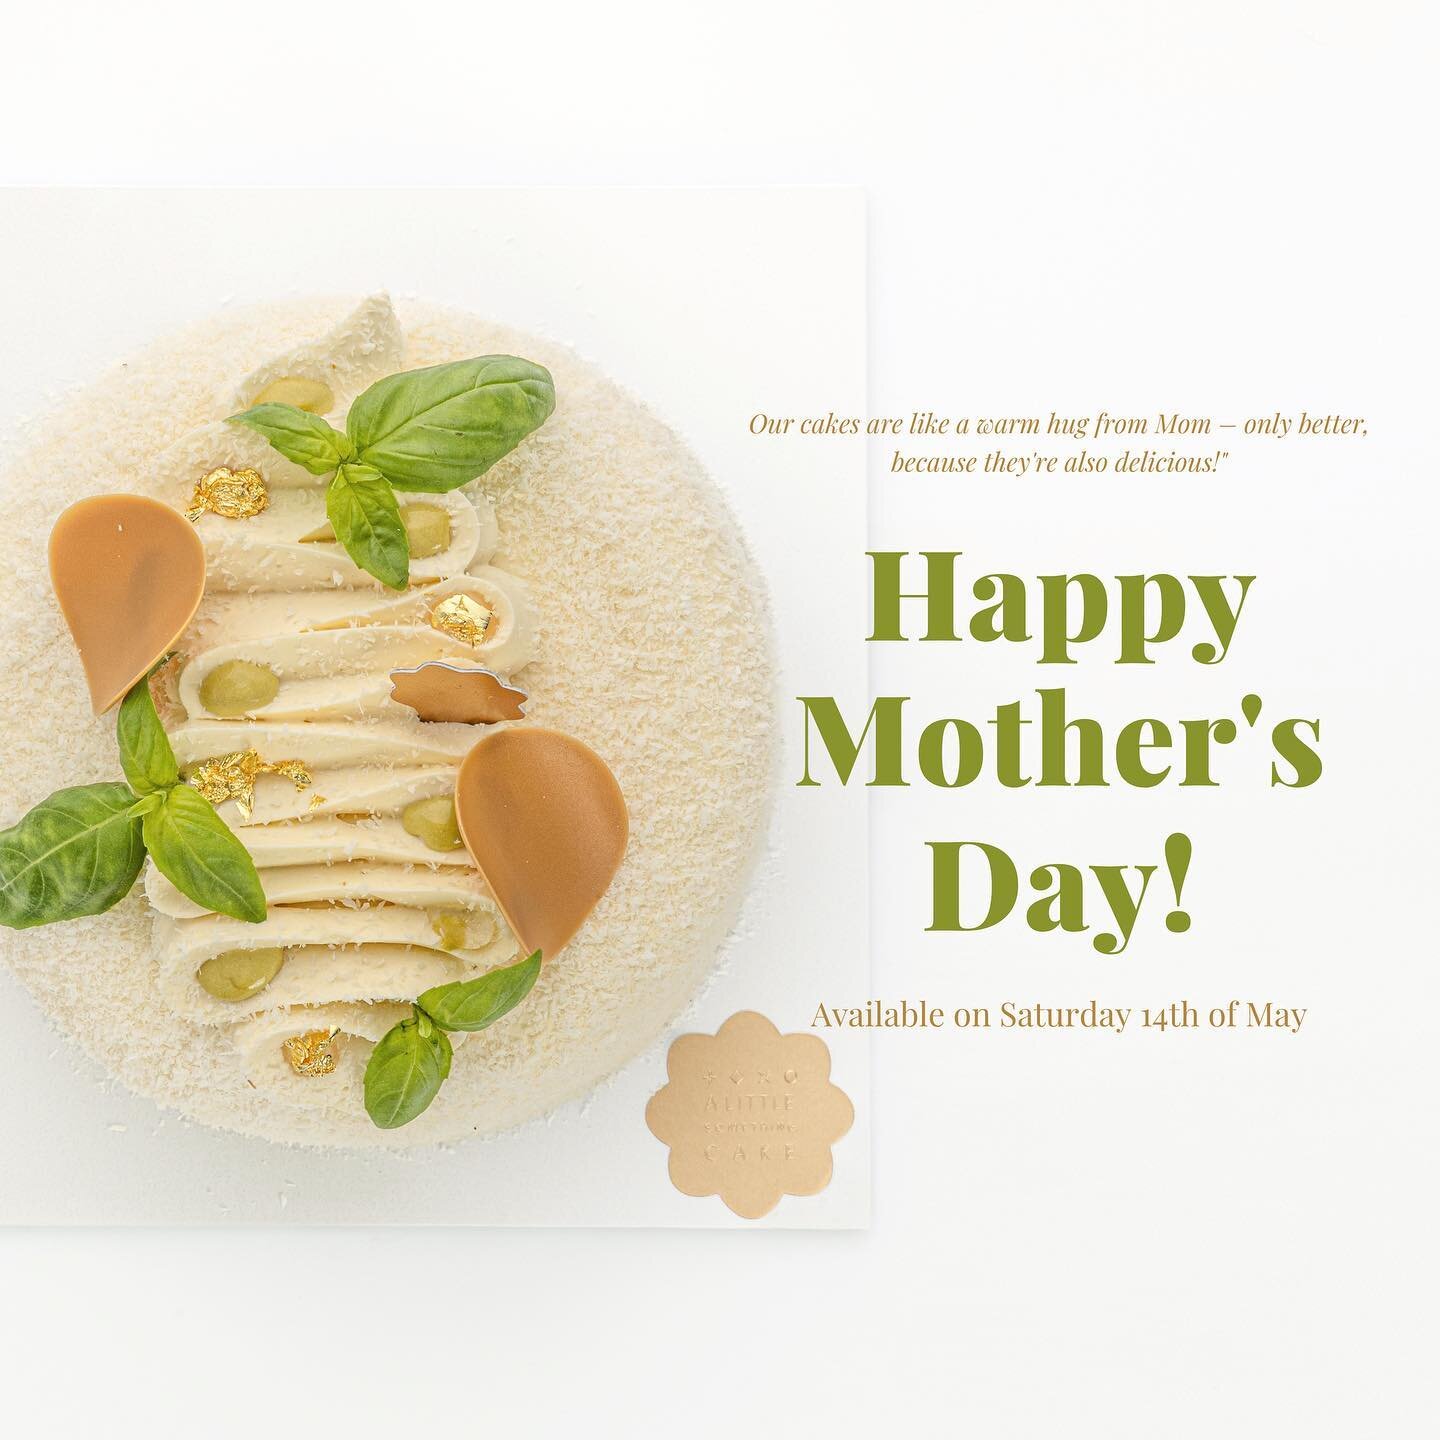 Don't let #Mom miss out on the best part of #MothersDay &ndash; the #dessert! Order her a delicious treat from @alittlesomethingcake , and we'll make sure she feels extra special. But shh, we won't tell her about the calories! 😋 DM us or give us a c